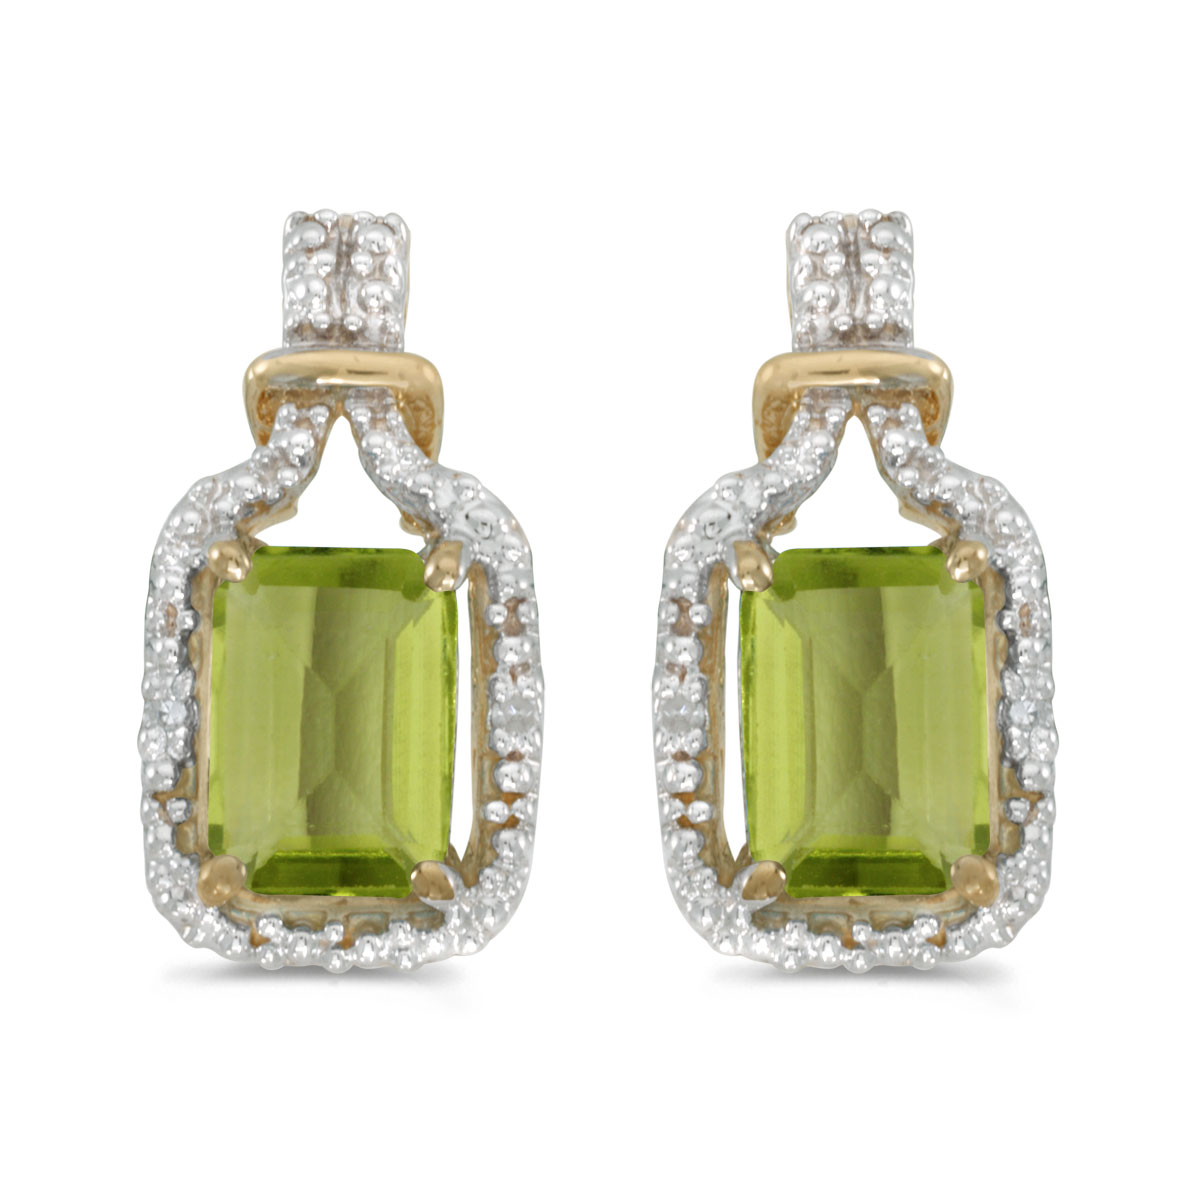 These 14k yellow gold emerald-cut peridot and diamond earrings feature 7x5 mm genuine natural per...